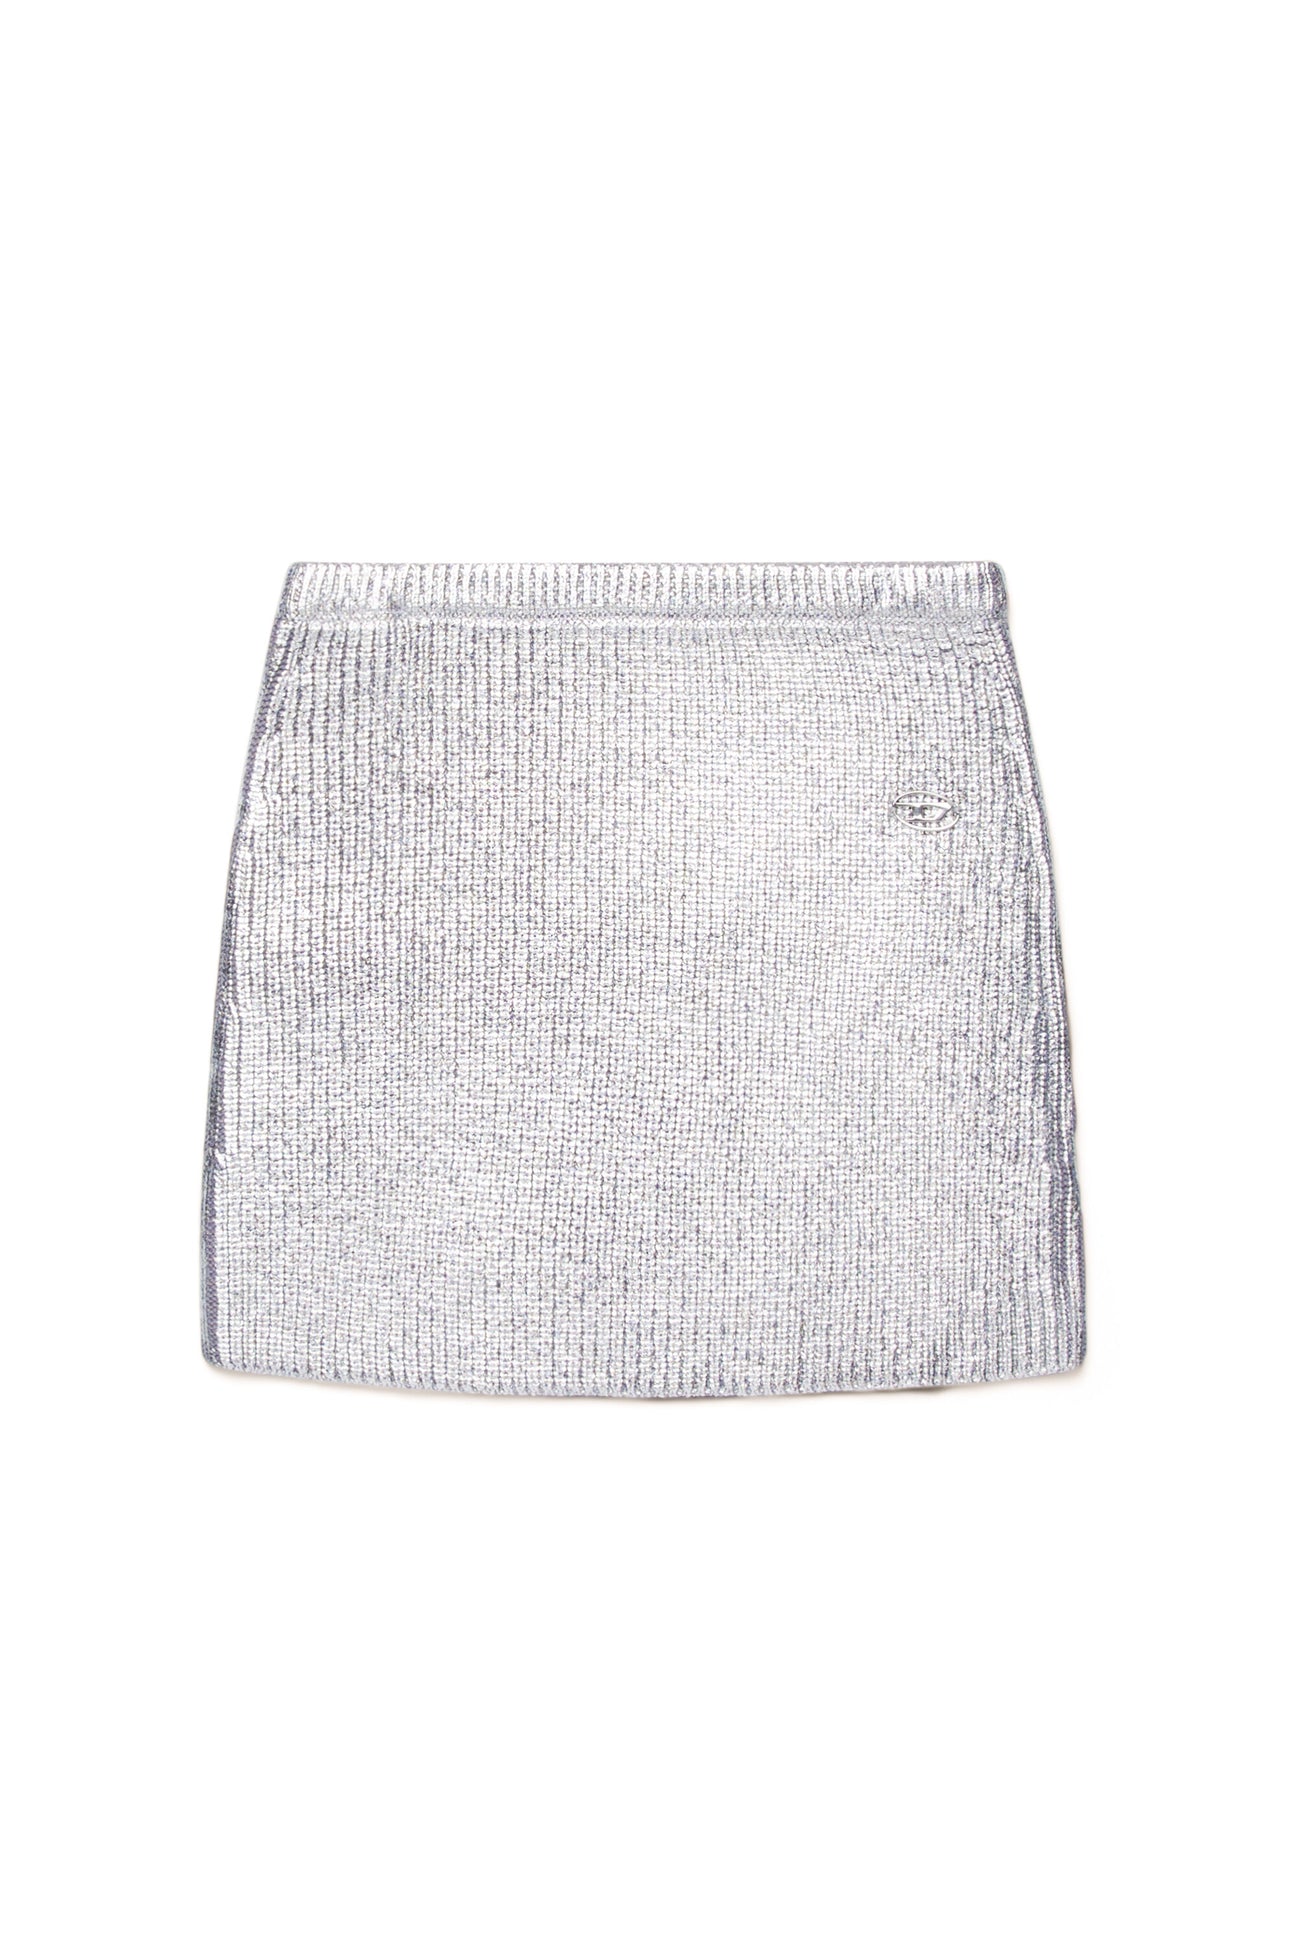 All-over silver mylar ribbed skirt All-over silver mylar ribbed skirt